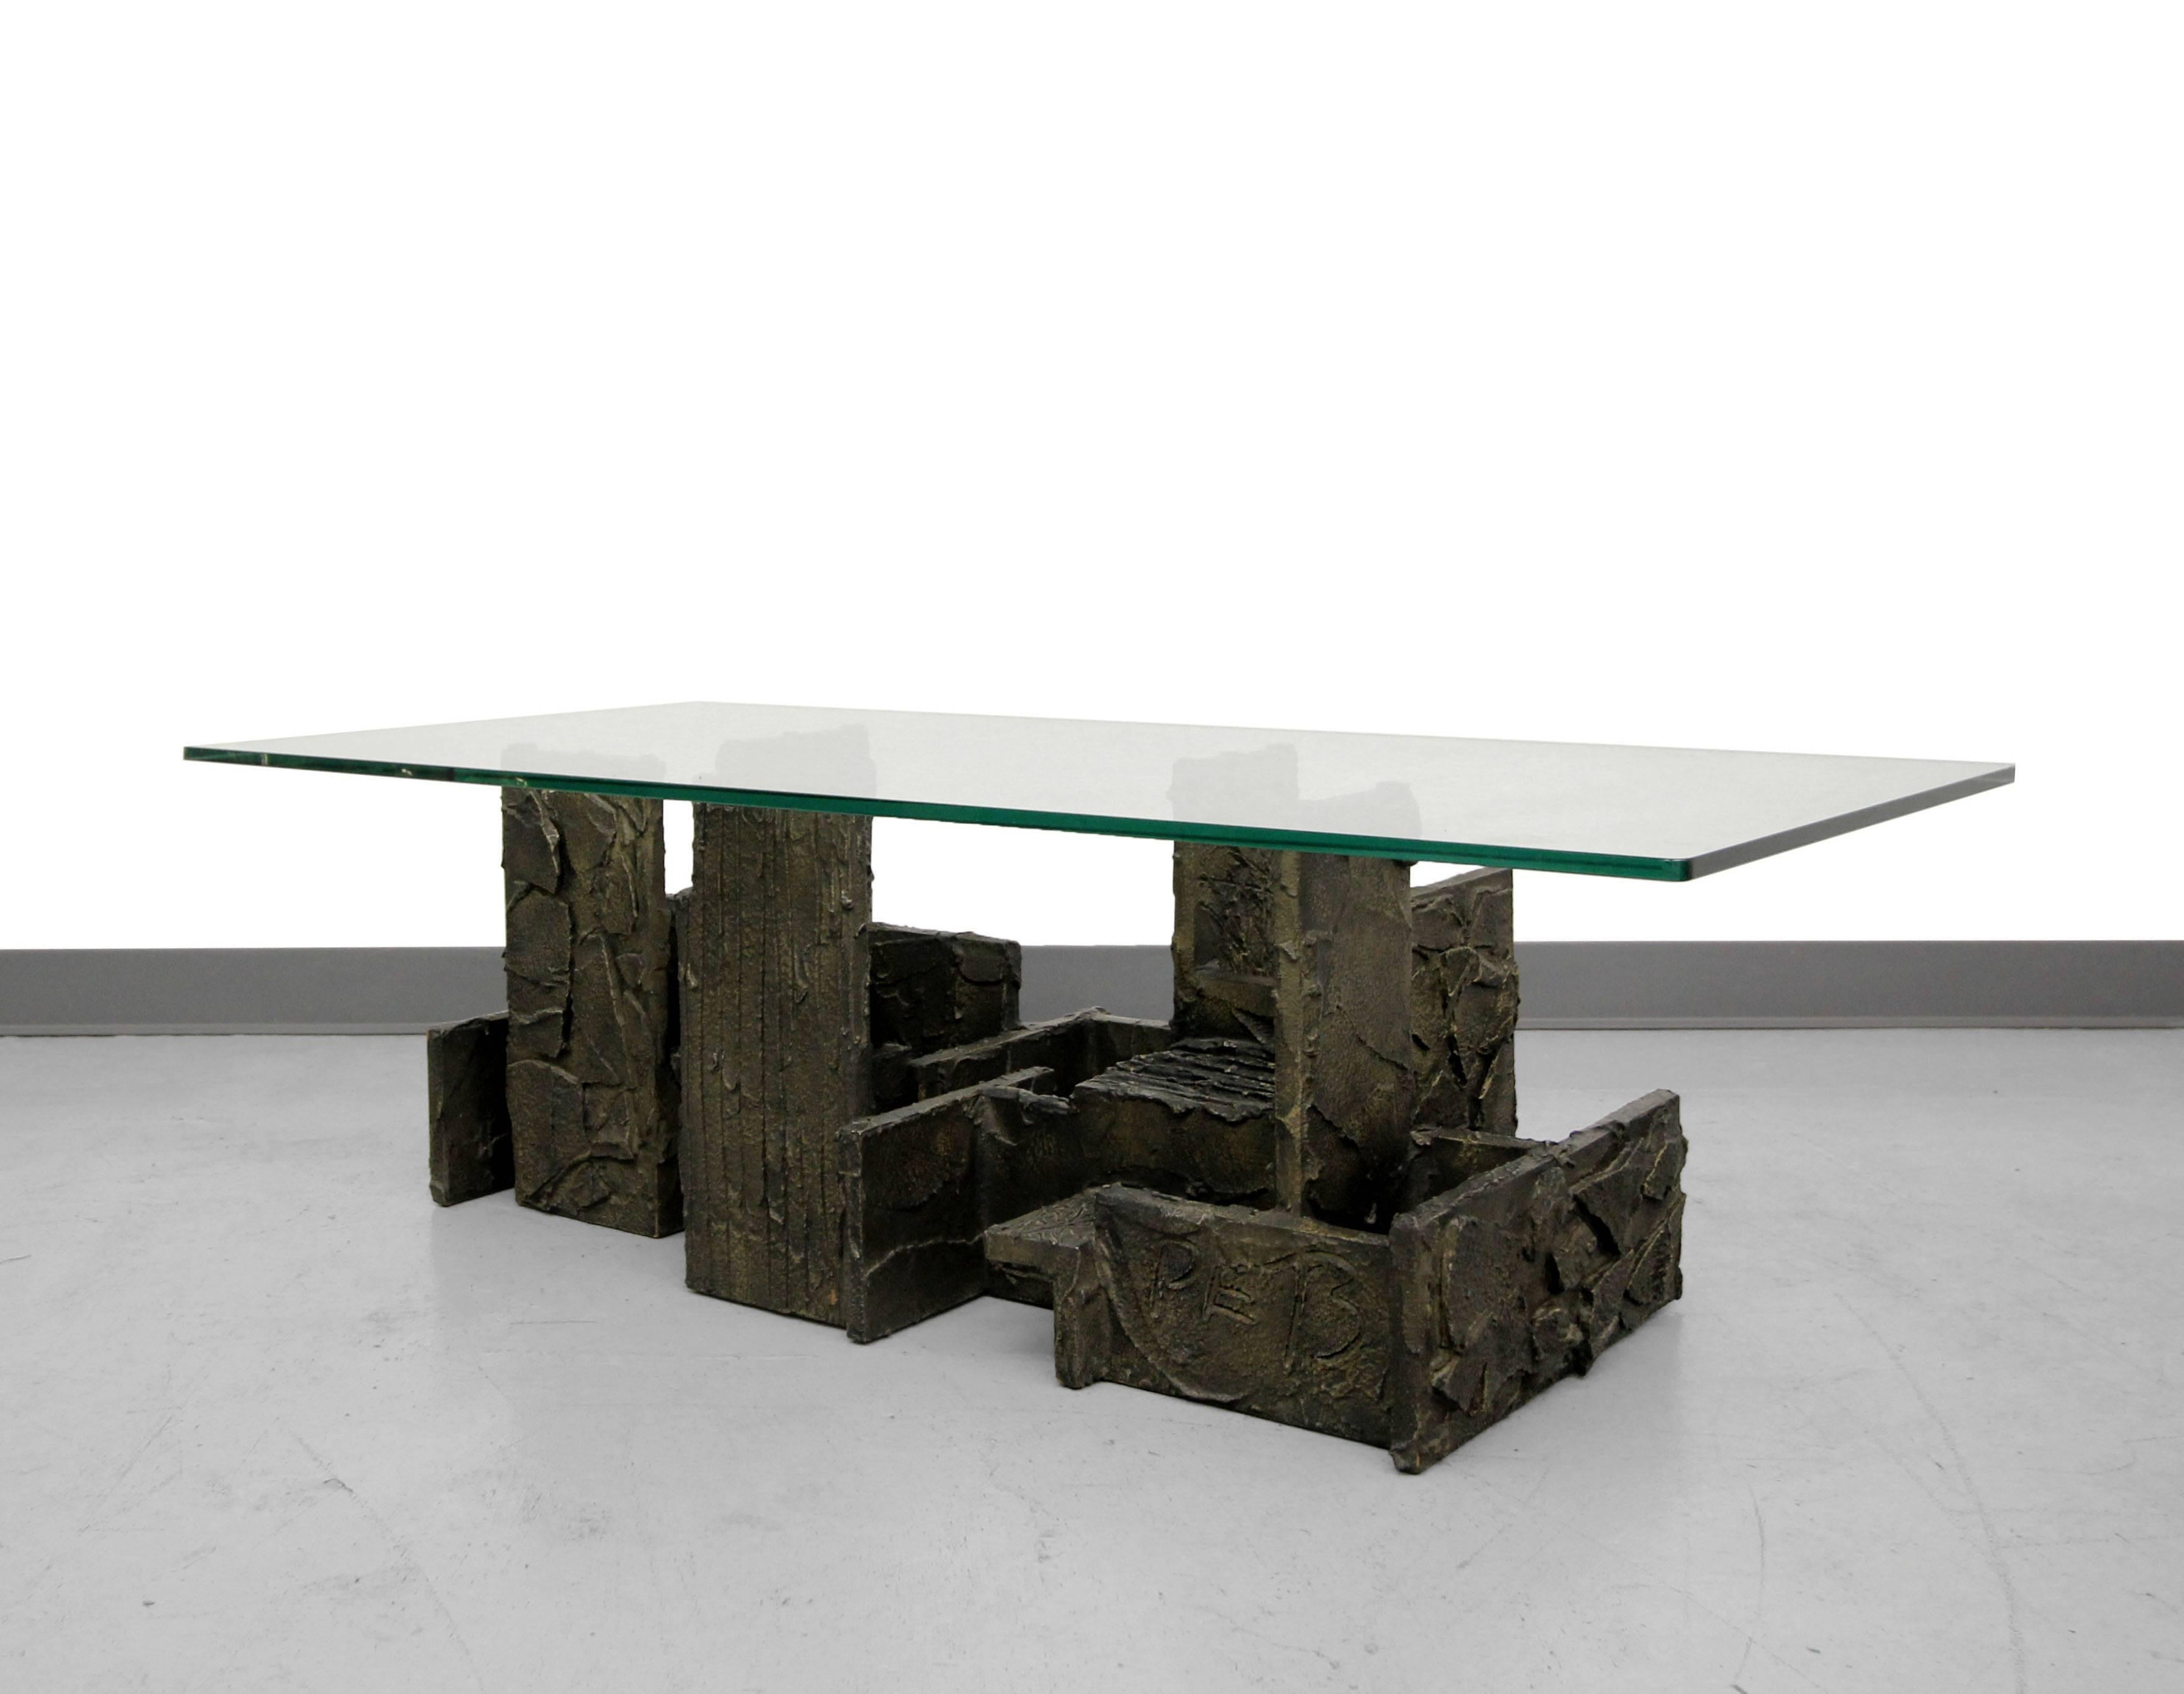 Authentic sculpted bronze Brutalist coffee table by Paul Evans for Directional, signed and dated PE '73.

Part of the Sculpted Bronze Series, this table is part of one of the most highly collected of all the Evans series.

A perfect example of